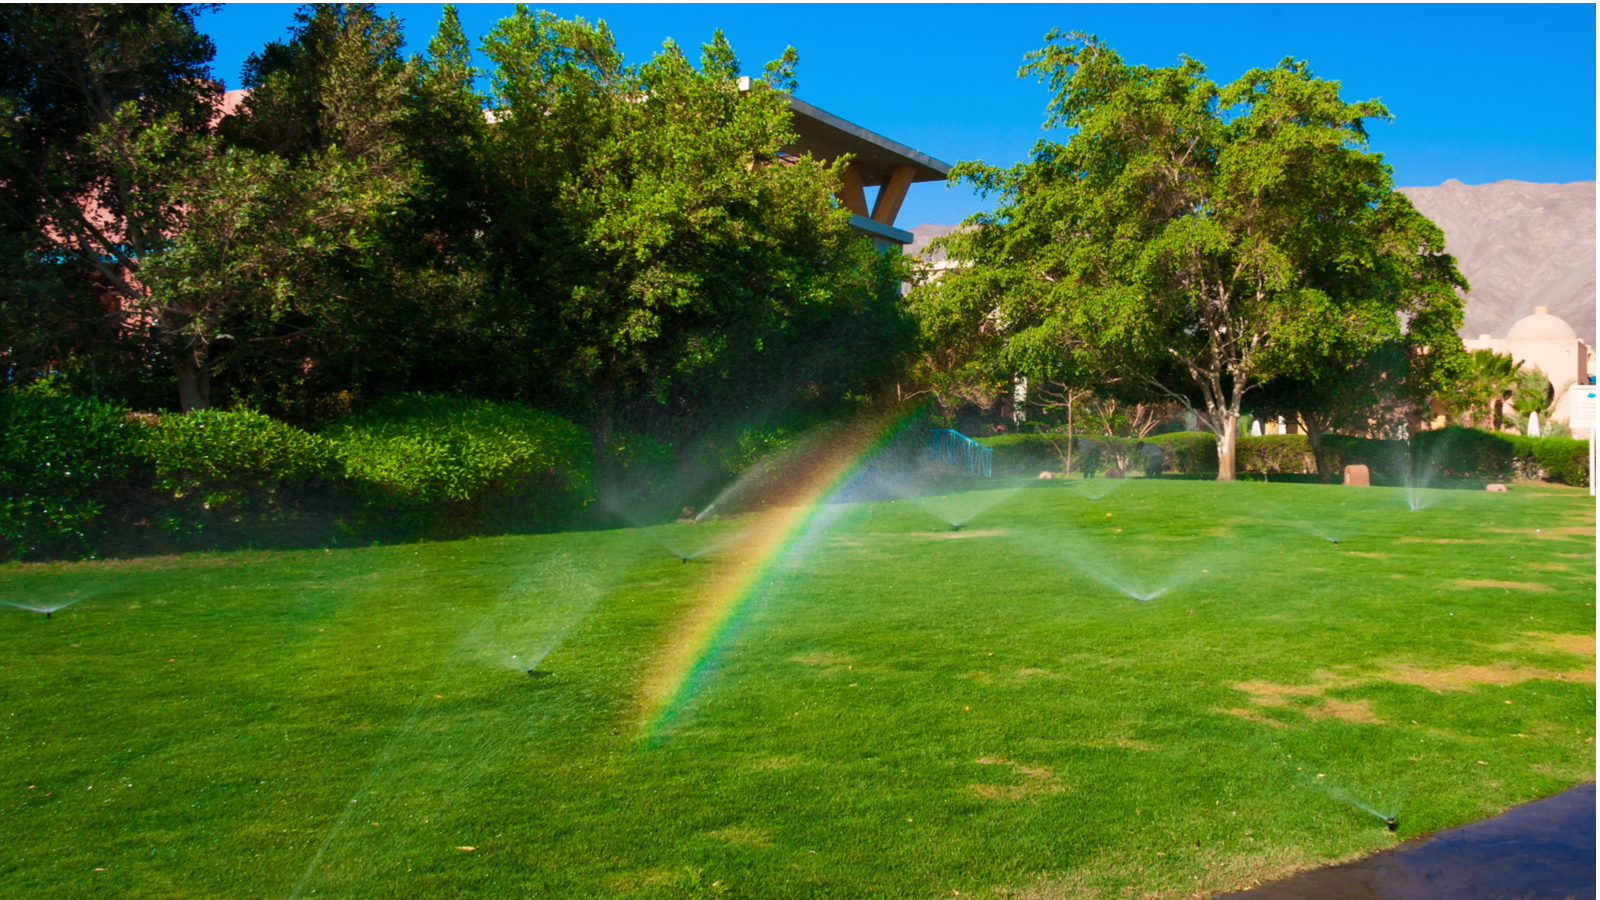 sprinkler-system-startup-Town and Country-MO | Town and Country, MO area sprinkler systems | Lawn Sprinklers of St. Louis